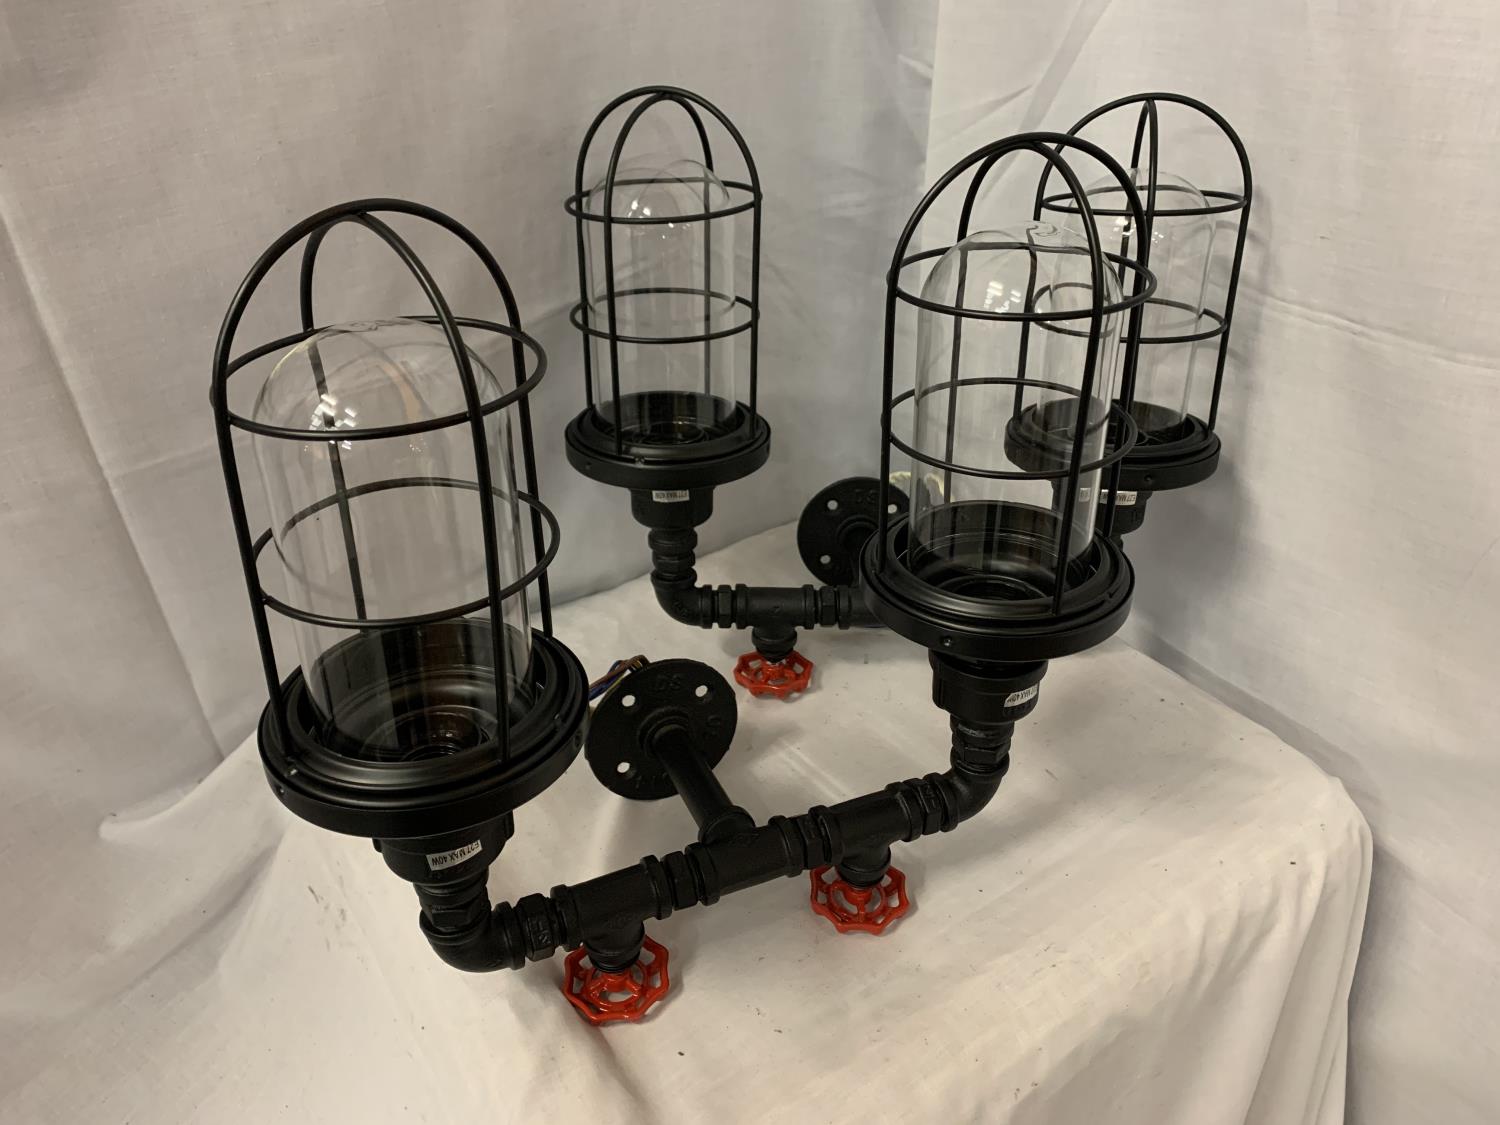 A PAIR OF INDUSTRIAL STYLE TWIN WALL LIGHTS WITH CAGED SHADES AND STEAM PIPE WITH TAPS EFFECT